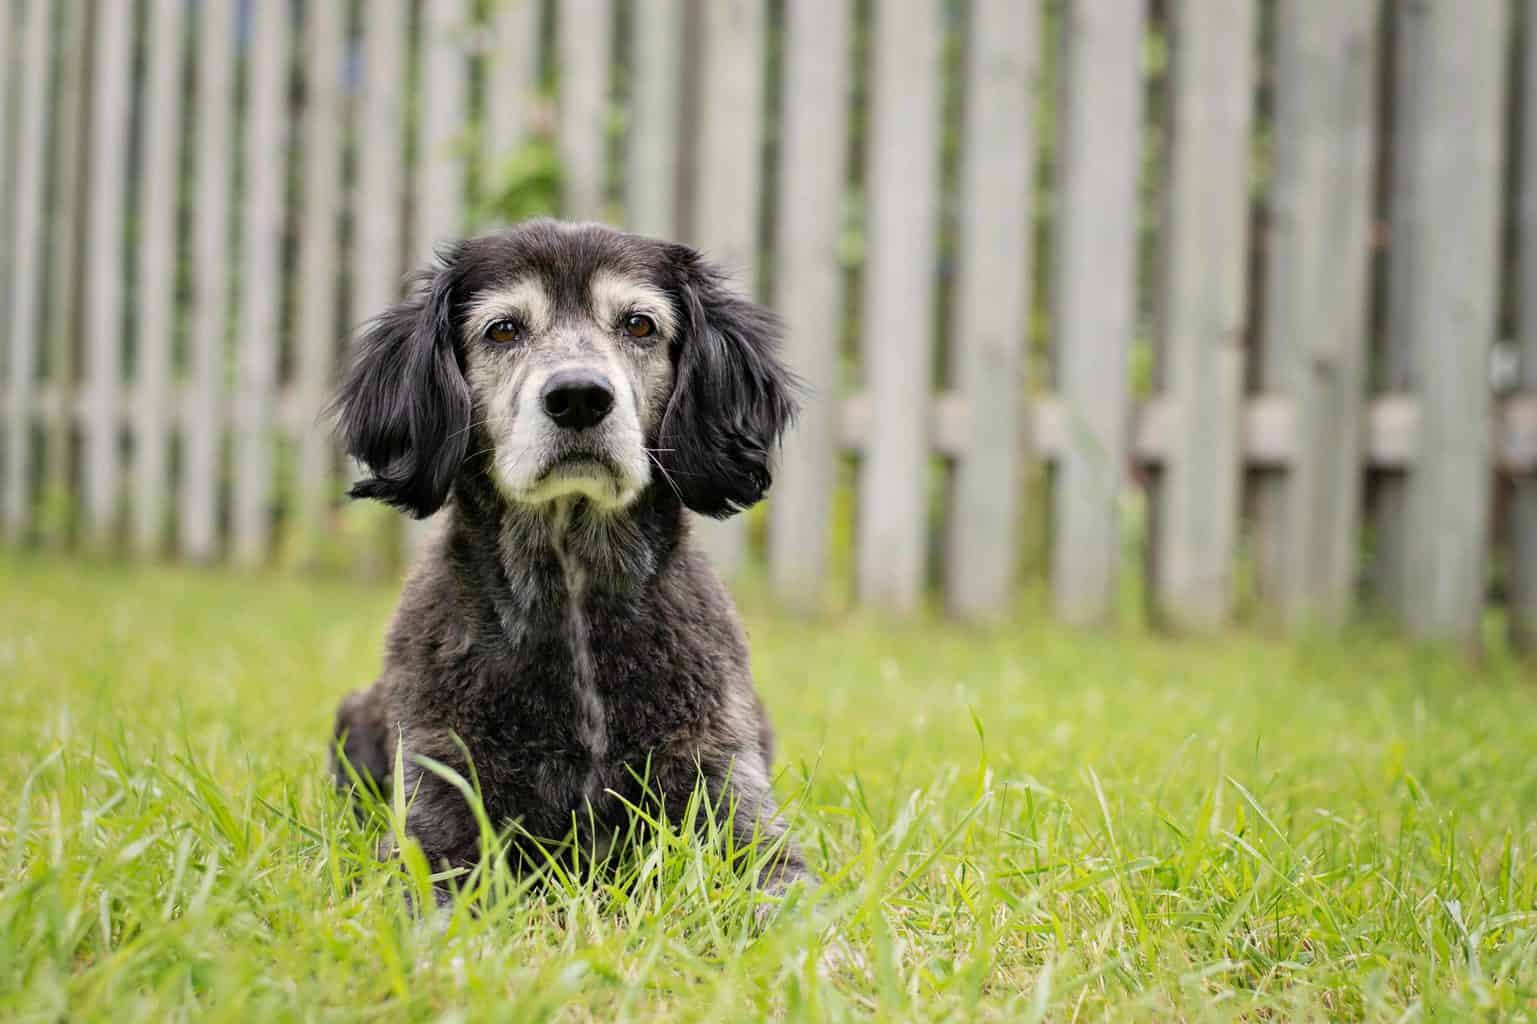 Old black dog with white face. Don't think your dog is too old to walk. Keeping your dog active improves its quality of life and can help extend its lifespan.